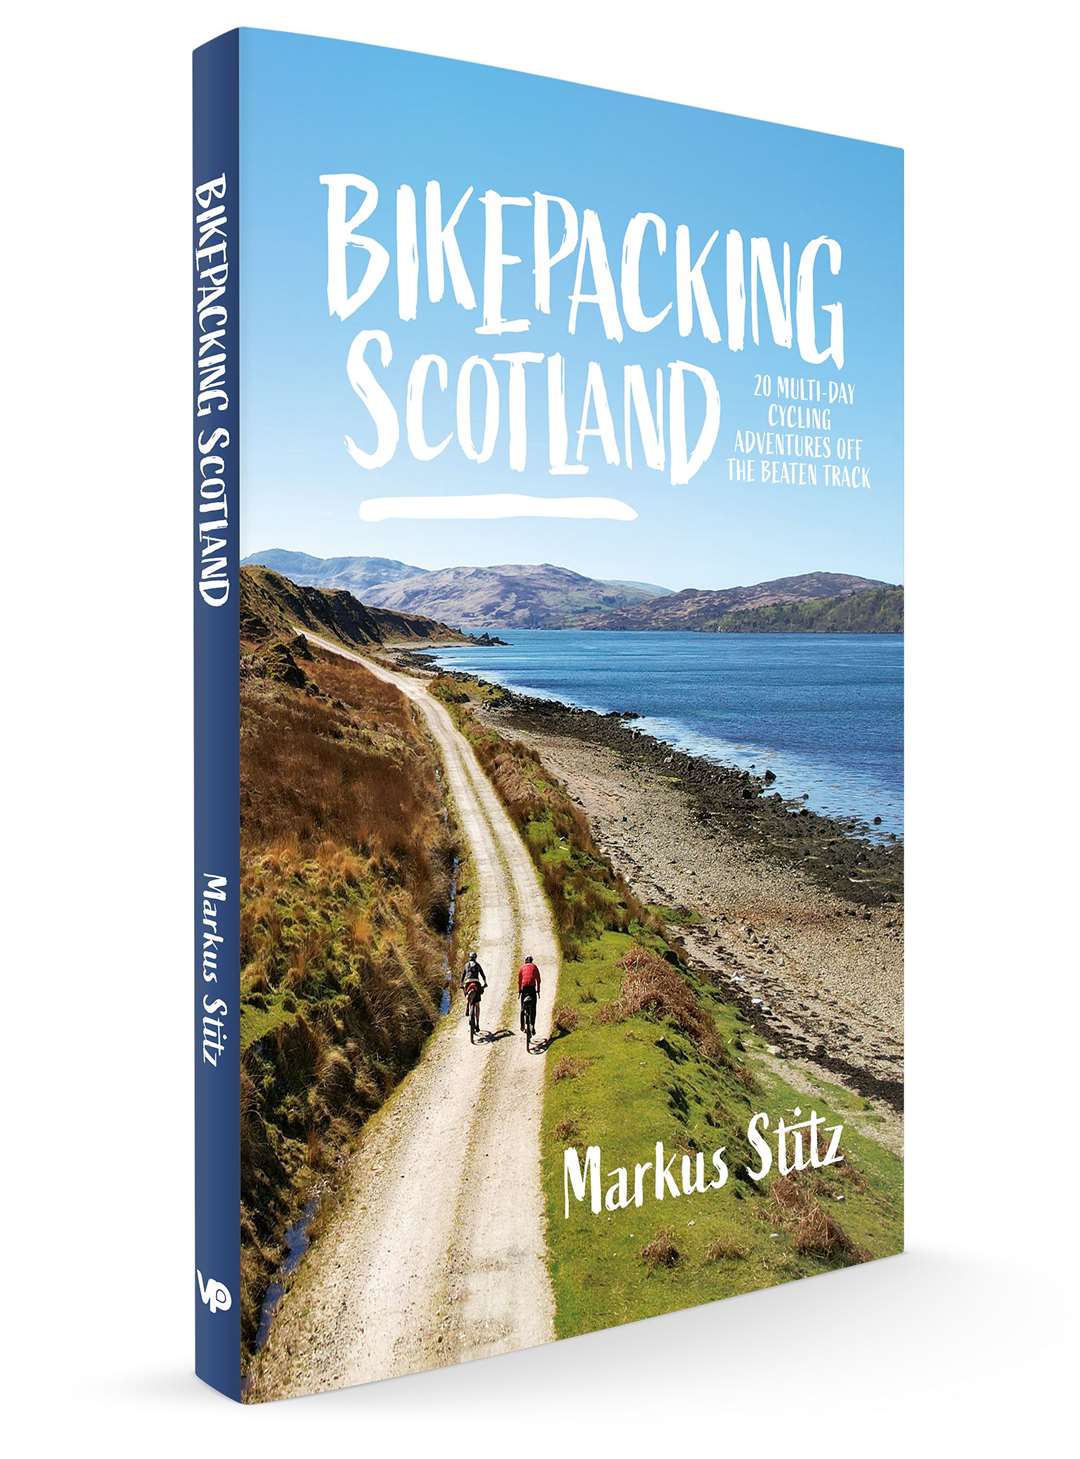 Bikepacking Scotland by Markus Stitz is out on May 18.